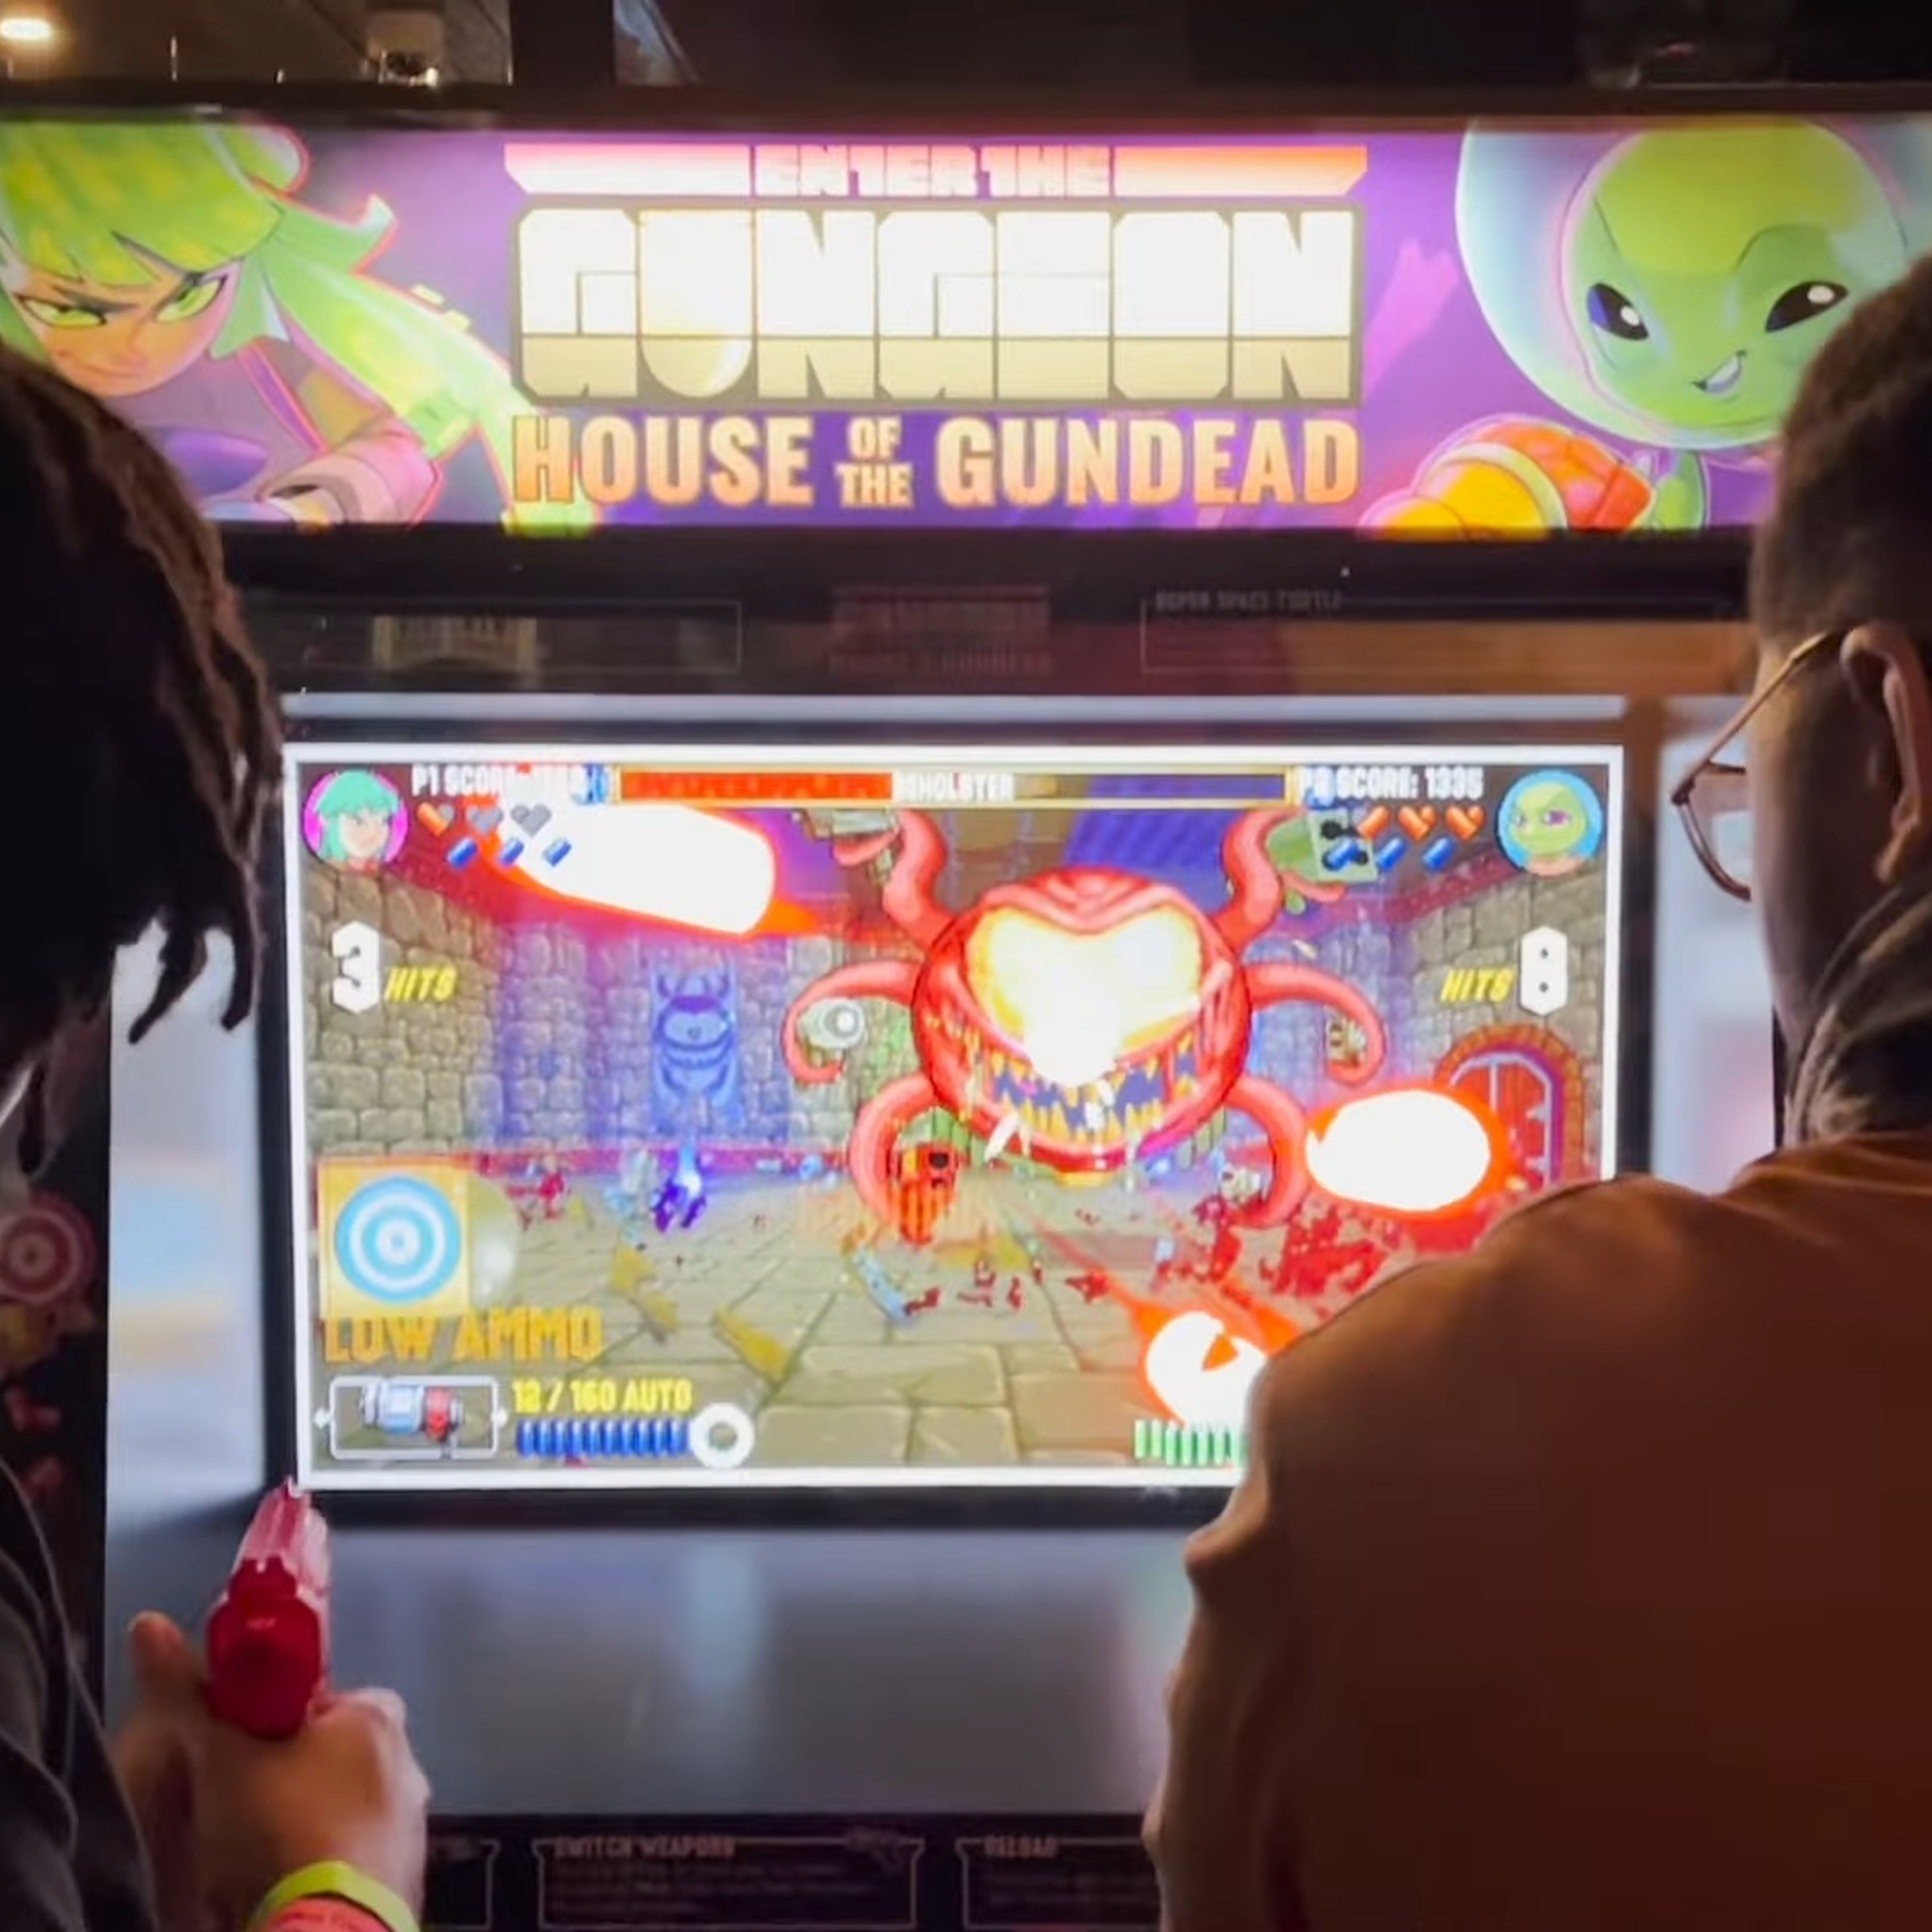 Two people playing the House of the Gundead arcade machine.